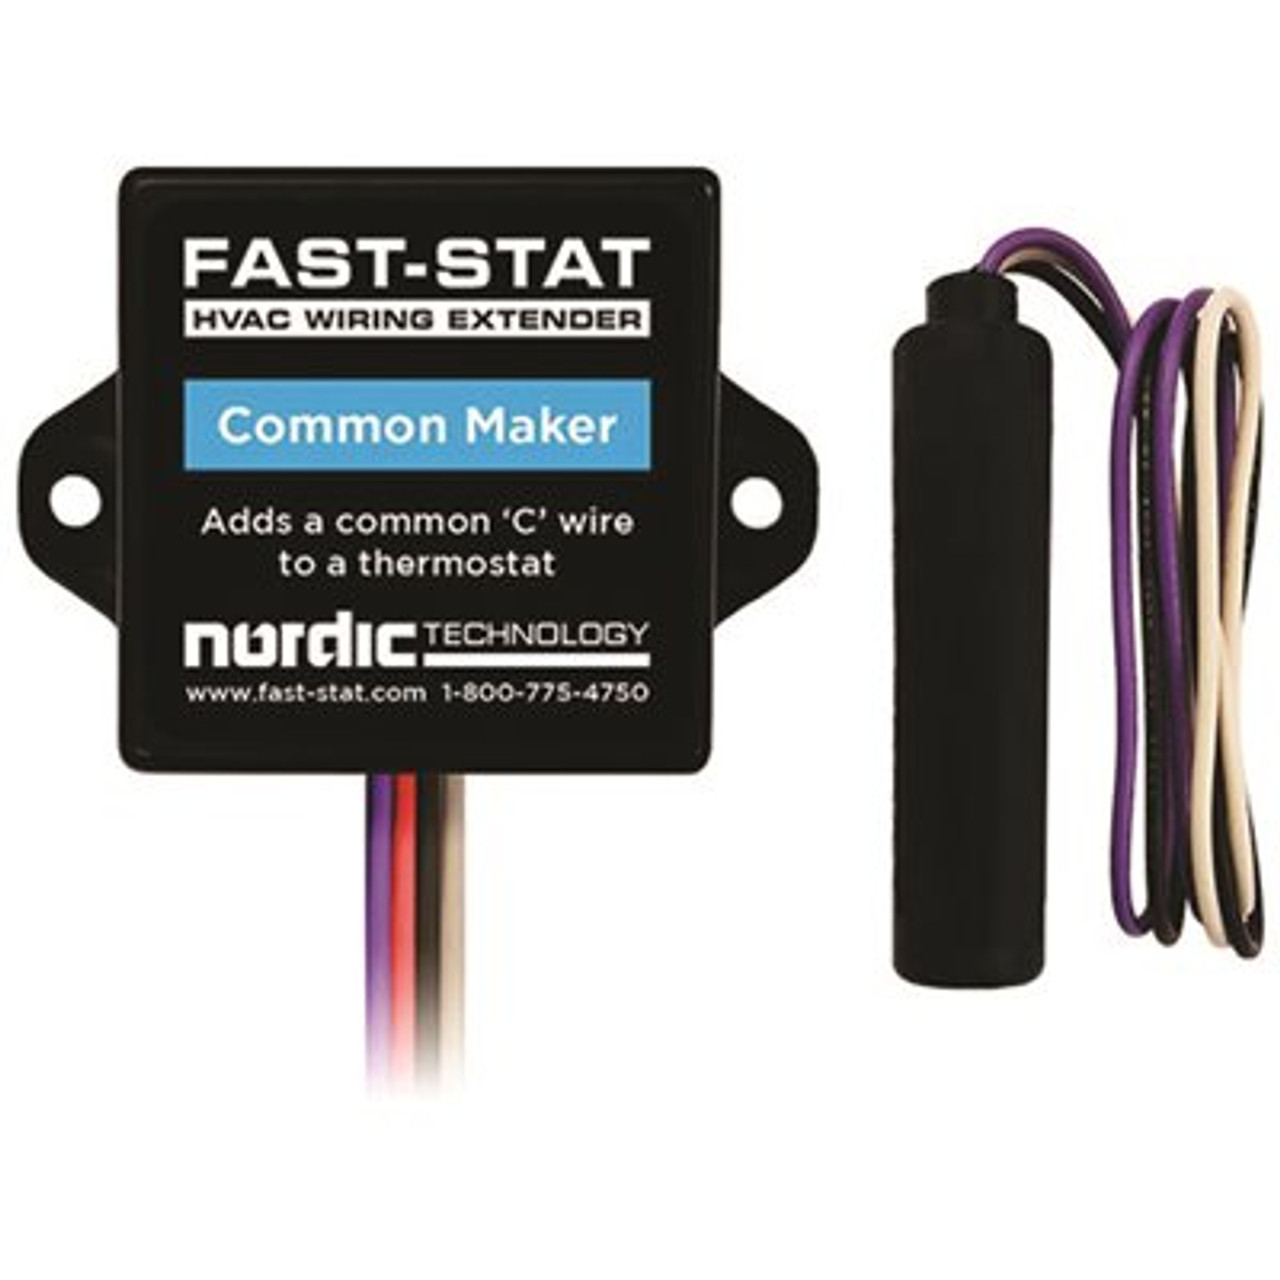 Fast-Stat Common Maker Thermostat Wire Extender (Adds A Common C Connection)